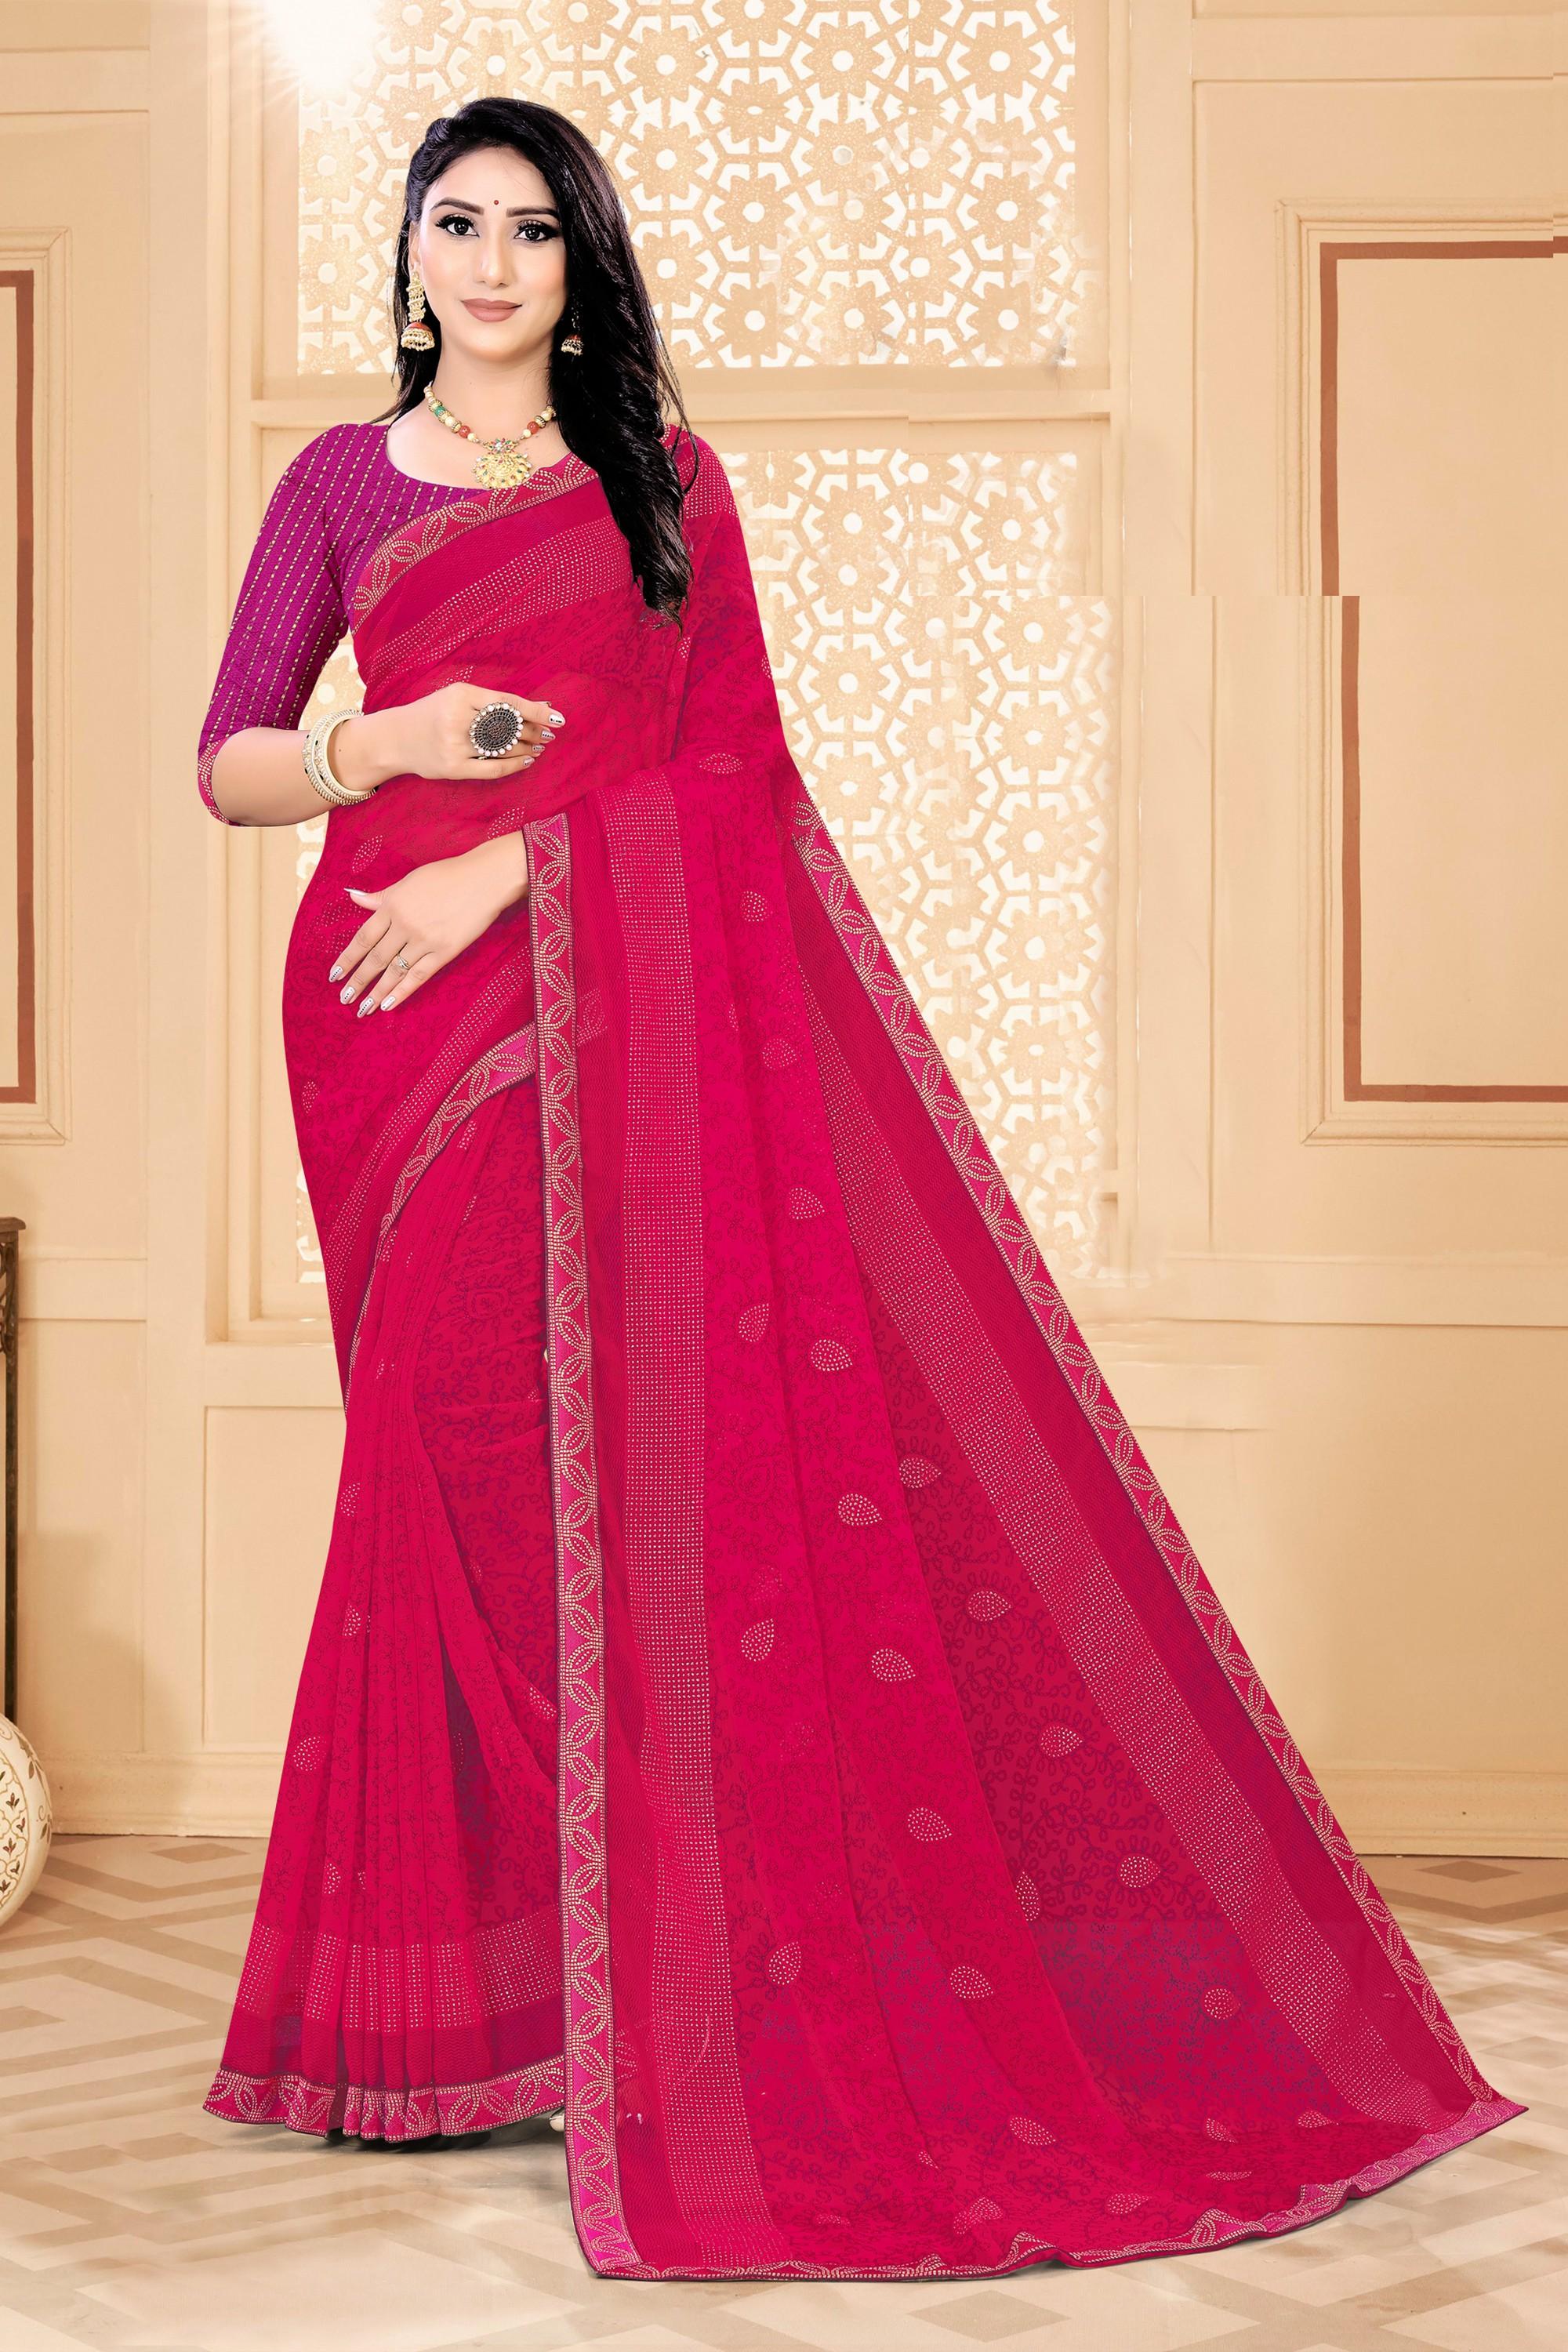 Red Chiffon Saree With Blouse IW24720